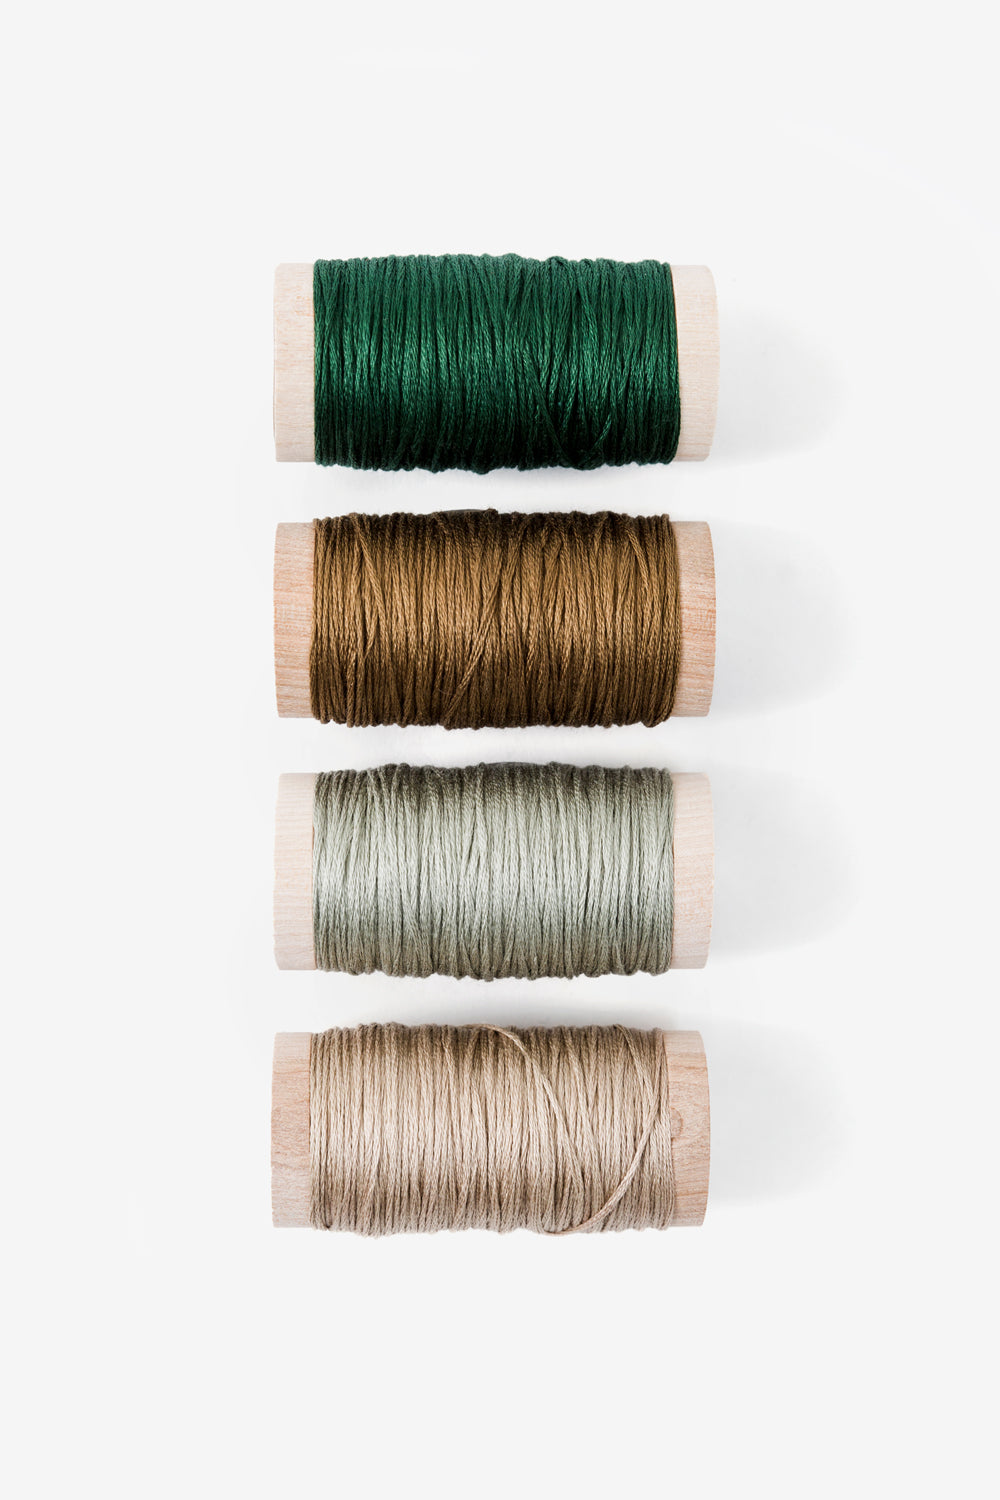 Spools of embroidery floss in forest, ochre, sage, and dogwood.